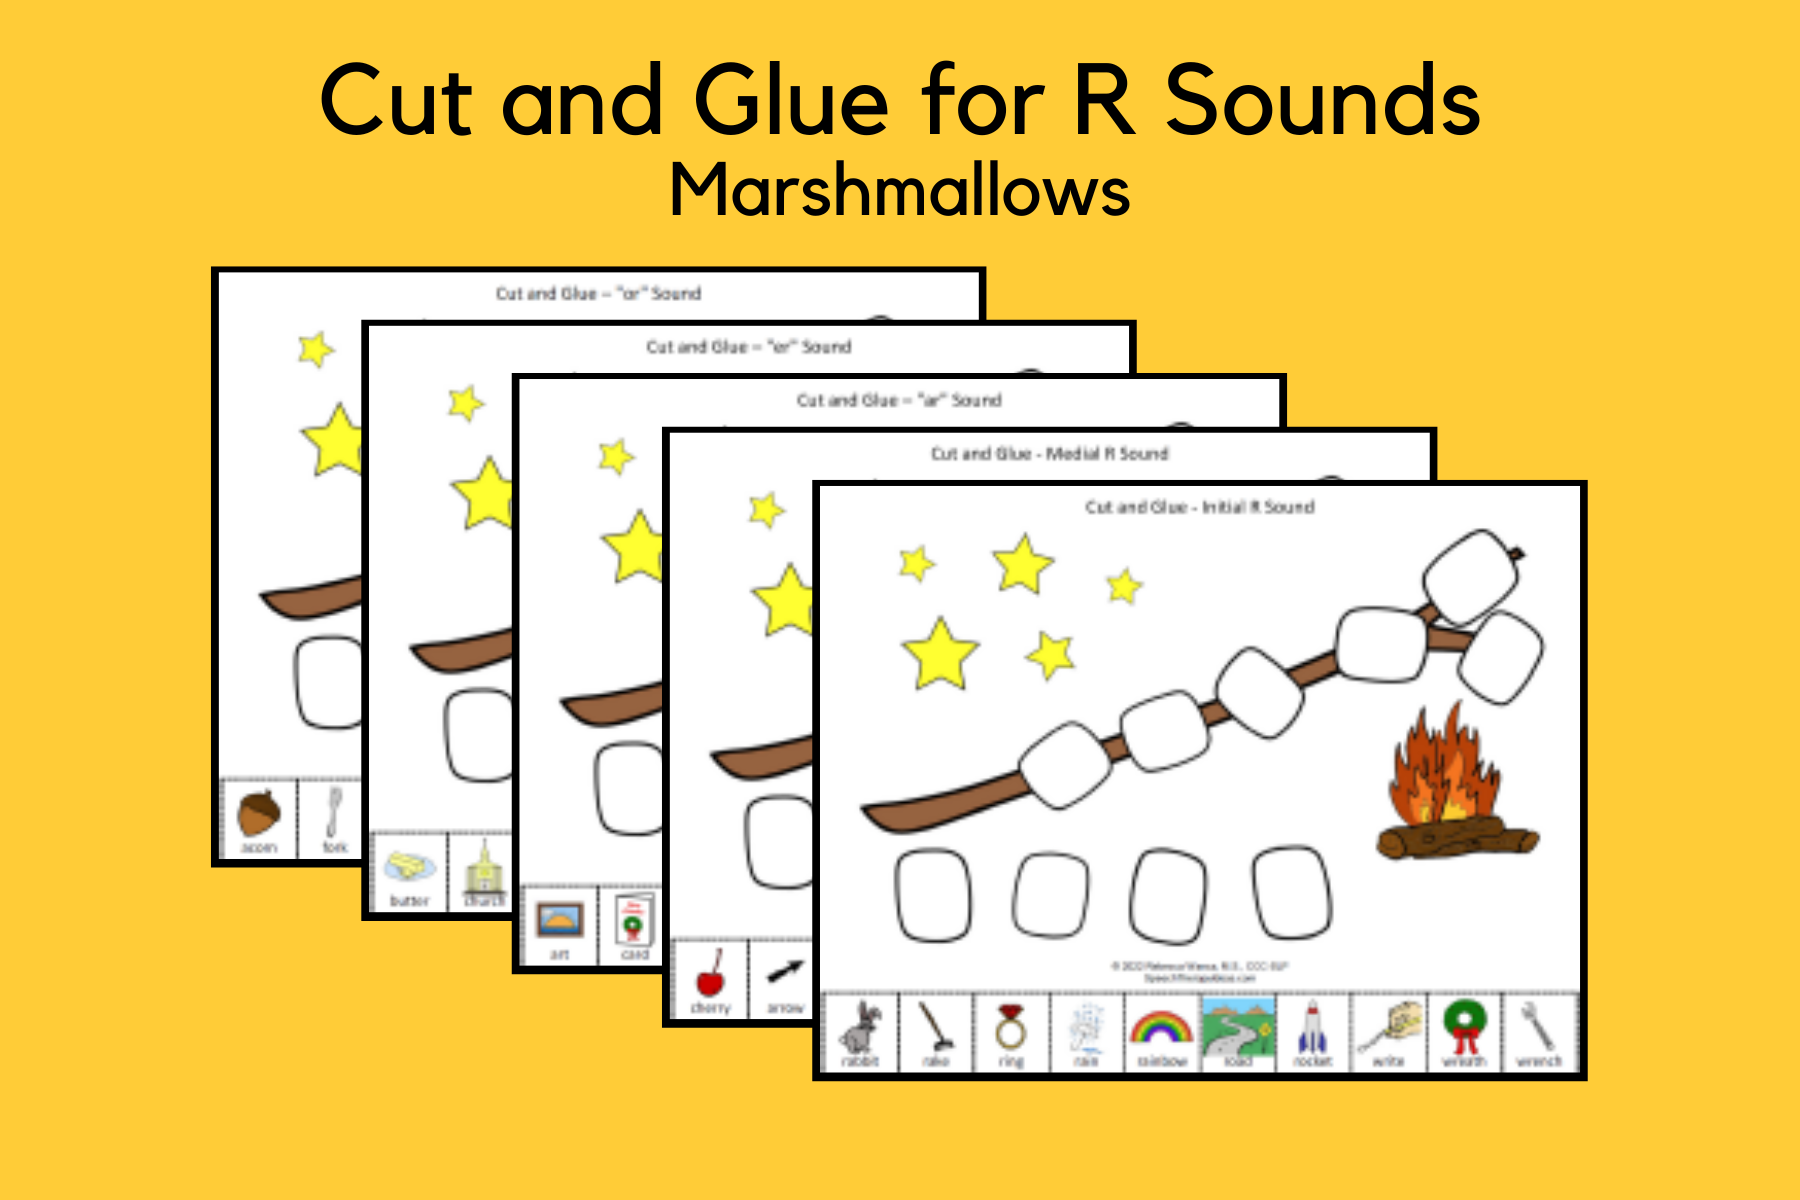 Cut and glue for R Sounds - Marshmallow